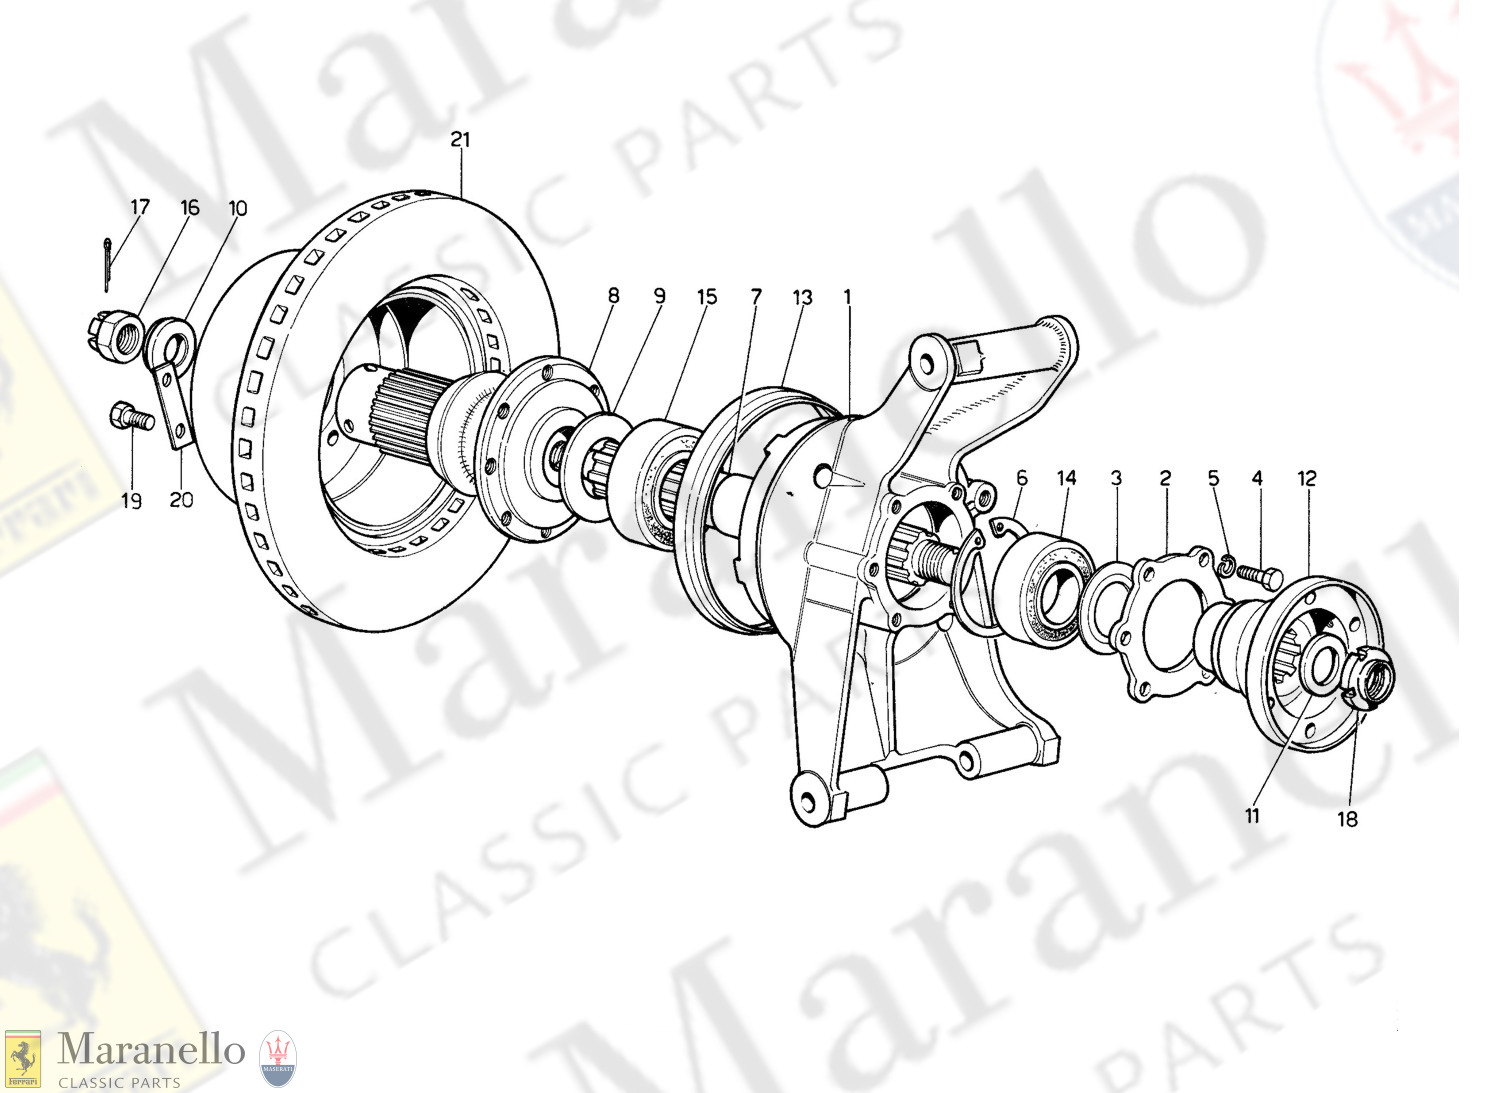 039 - Rear Suspension And Brake Disc